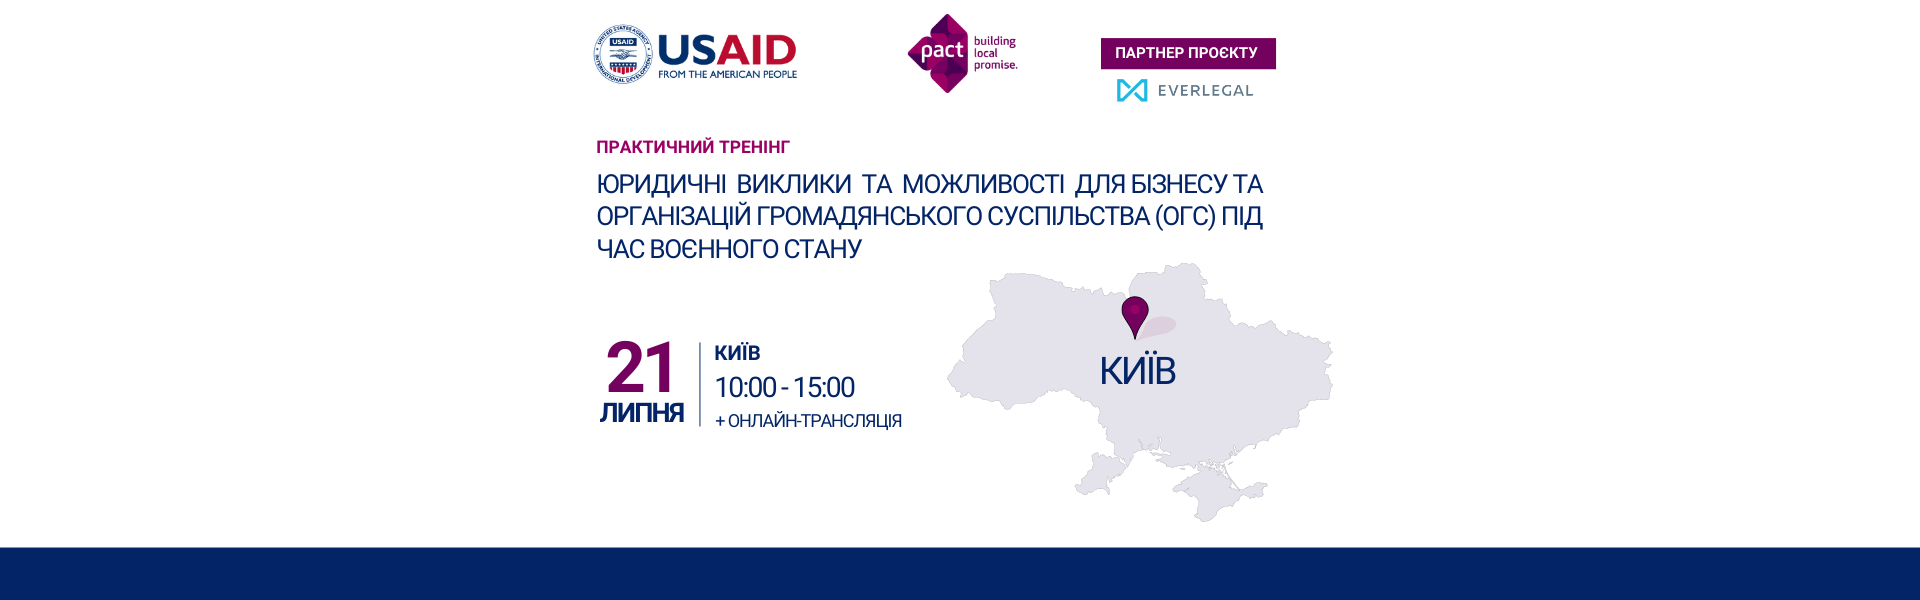 Practical training for business and civil society organisations in Kyiv